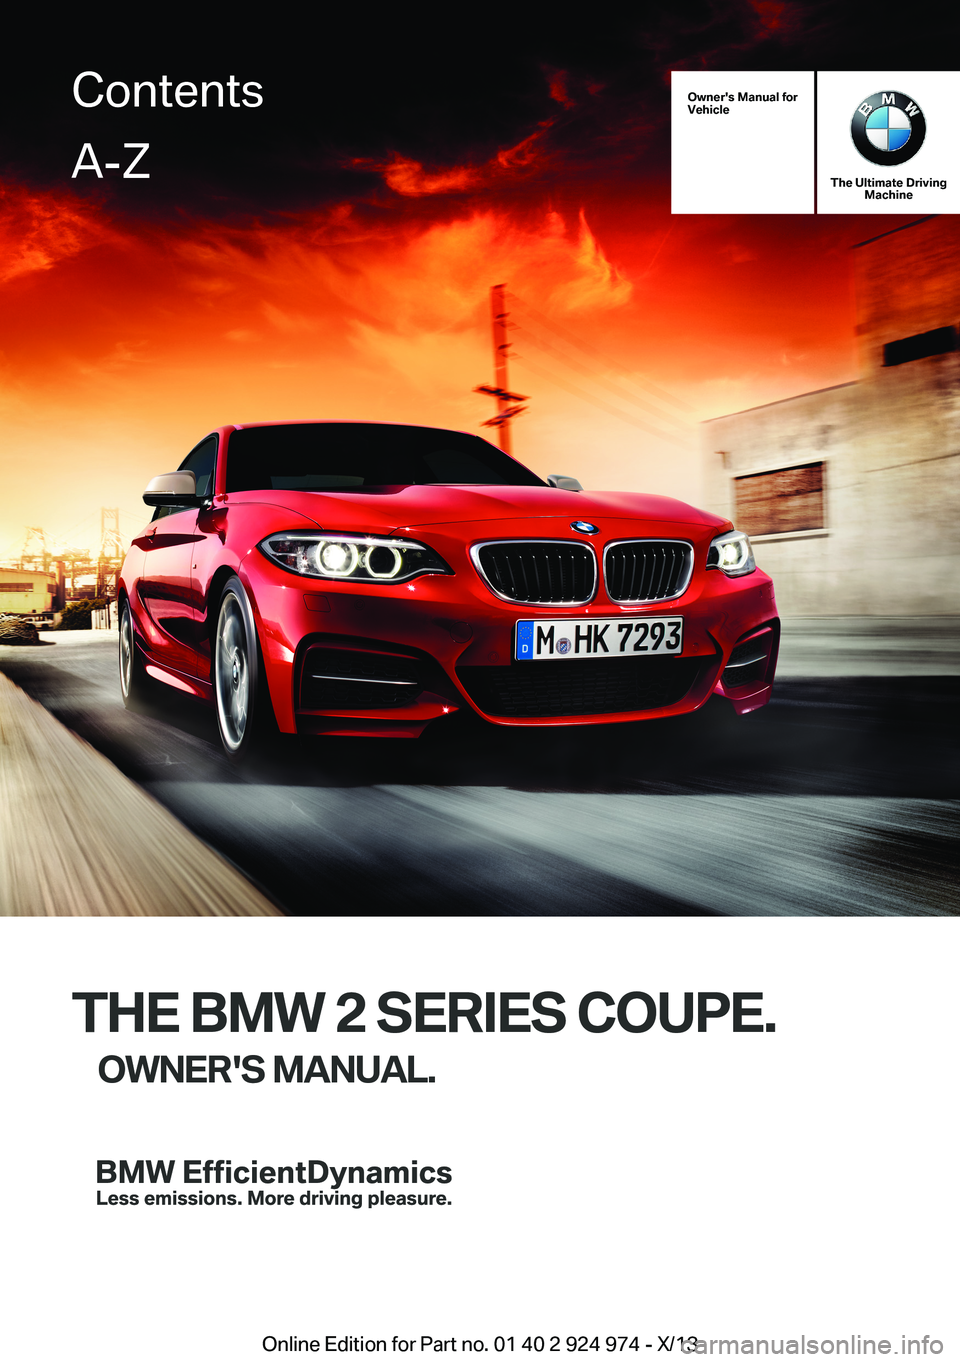 BMW 228I 2014  Owners Manual Owner's Manual forVehicle
The Ultimate DrivingMachine
THE BMW 2 SERIES COUPE.
OWNER'S MANUAL.ContentsA-Z
Online Edition for Part no. 01 40 2 924 974 - X/13   